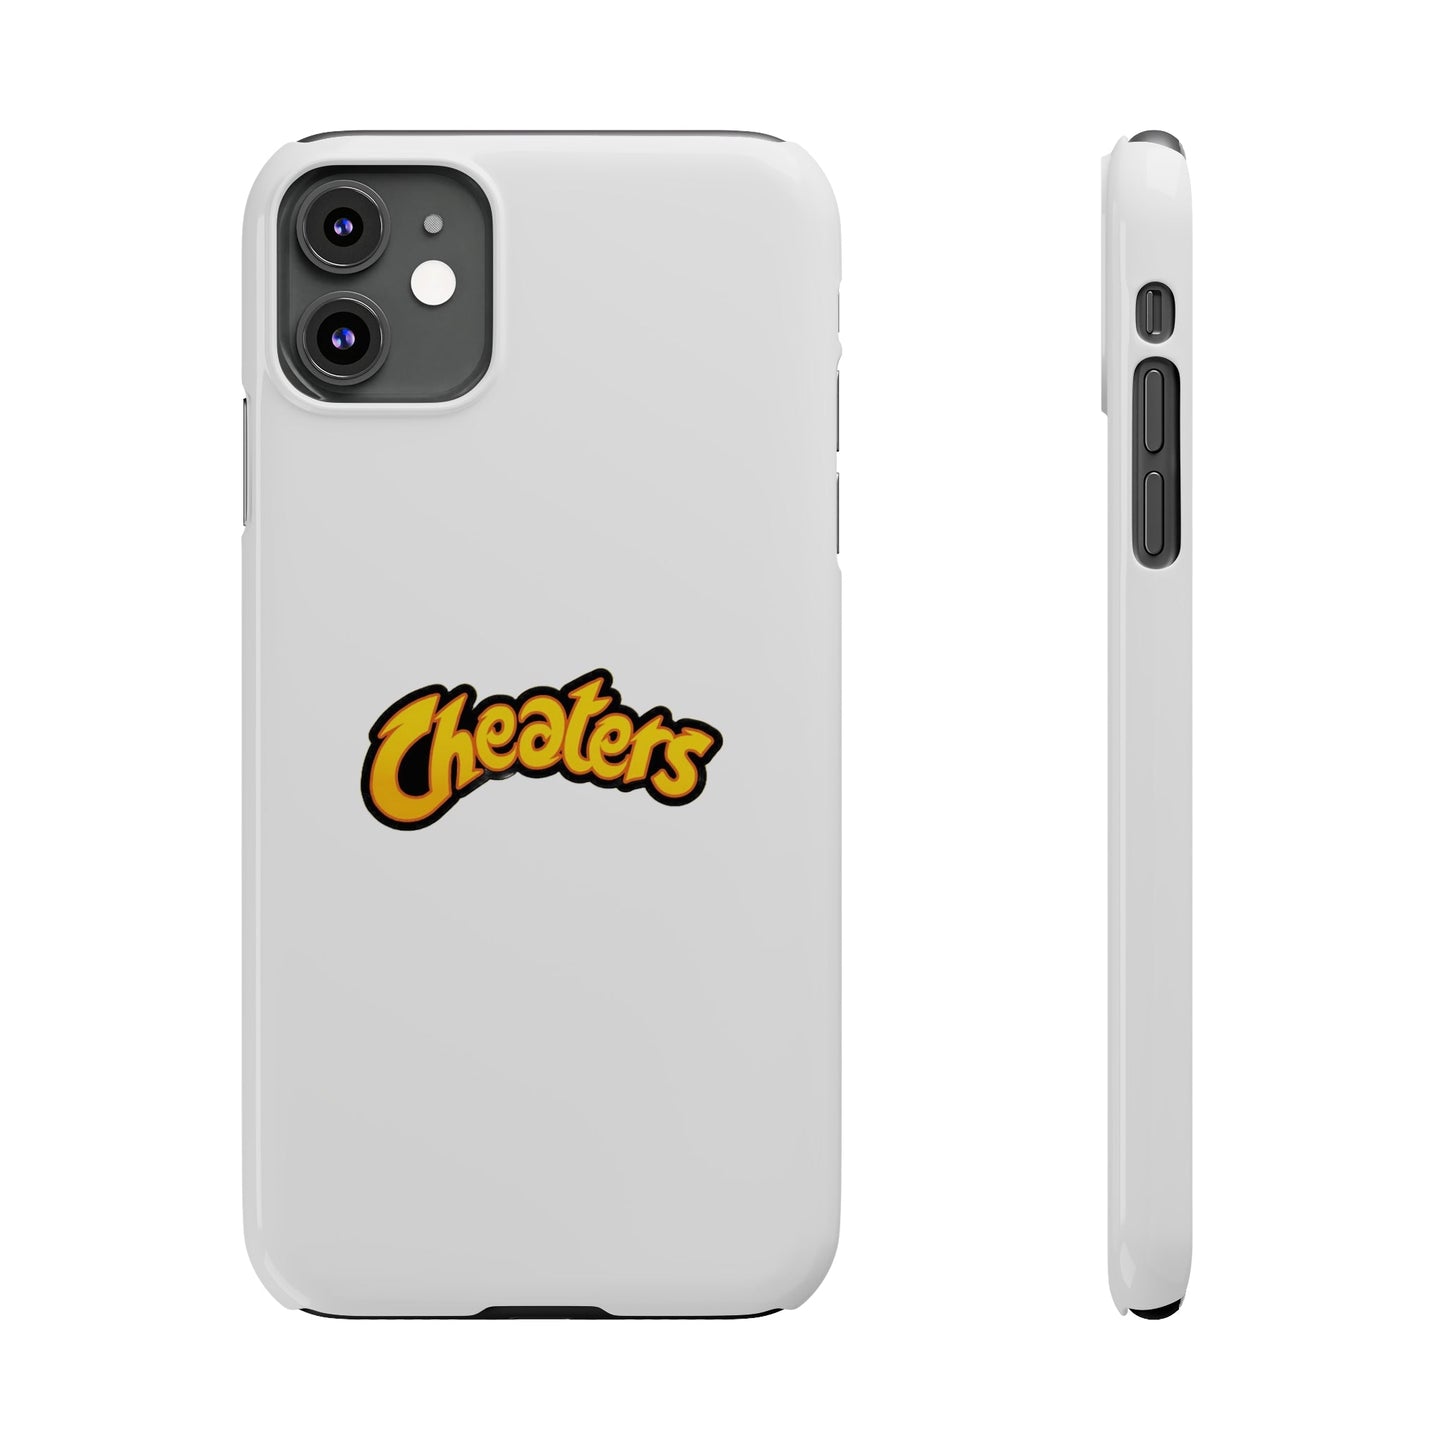 "Cheaters" MagStrong Phone Cases iPhone 11